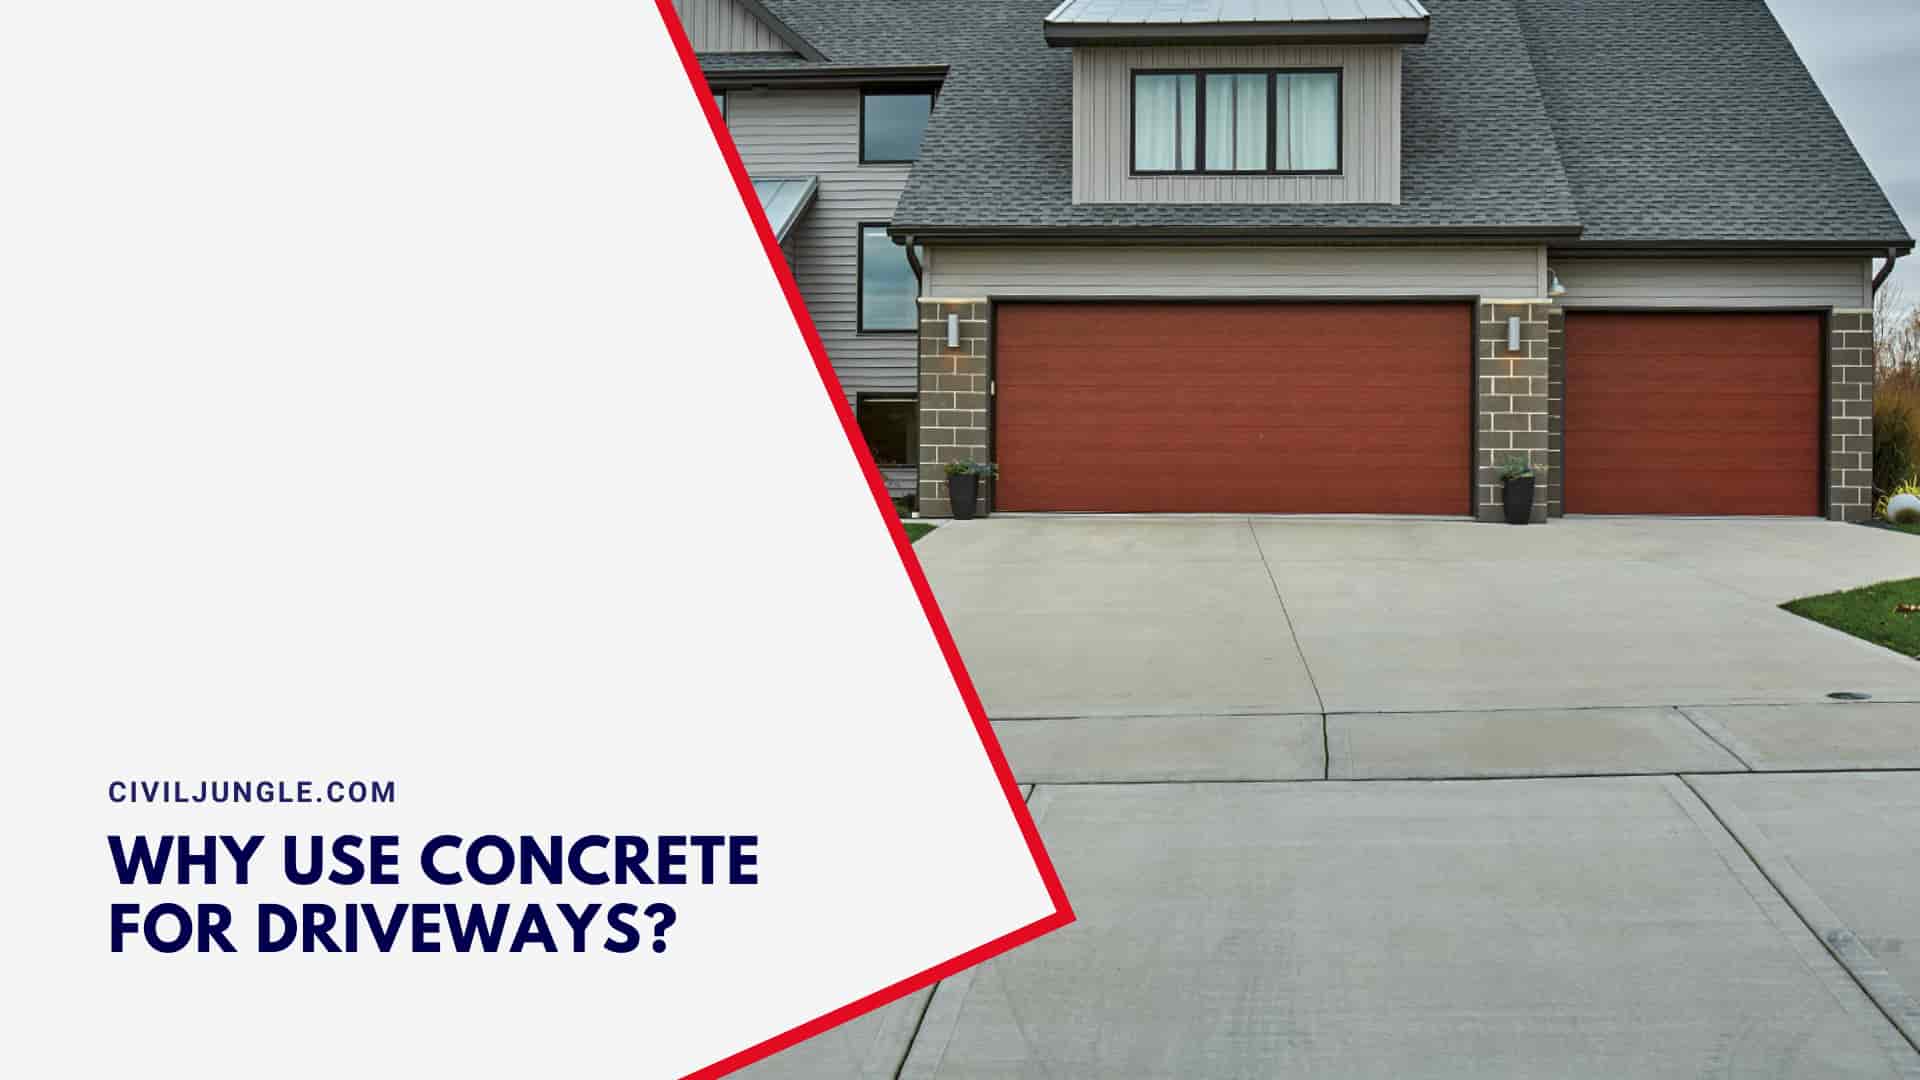 Why Use Concrete For Driveways?